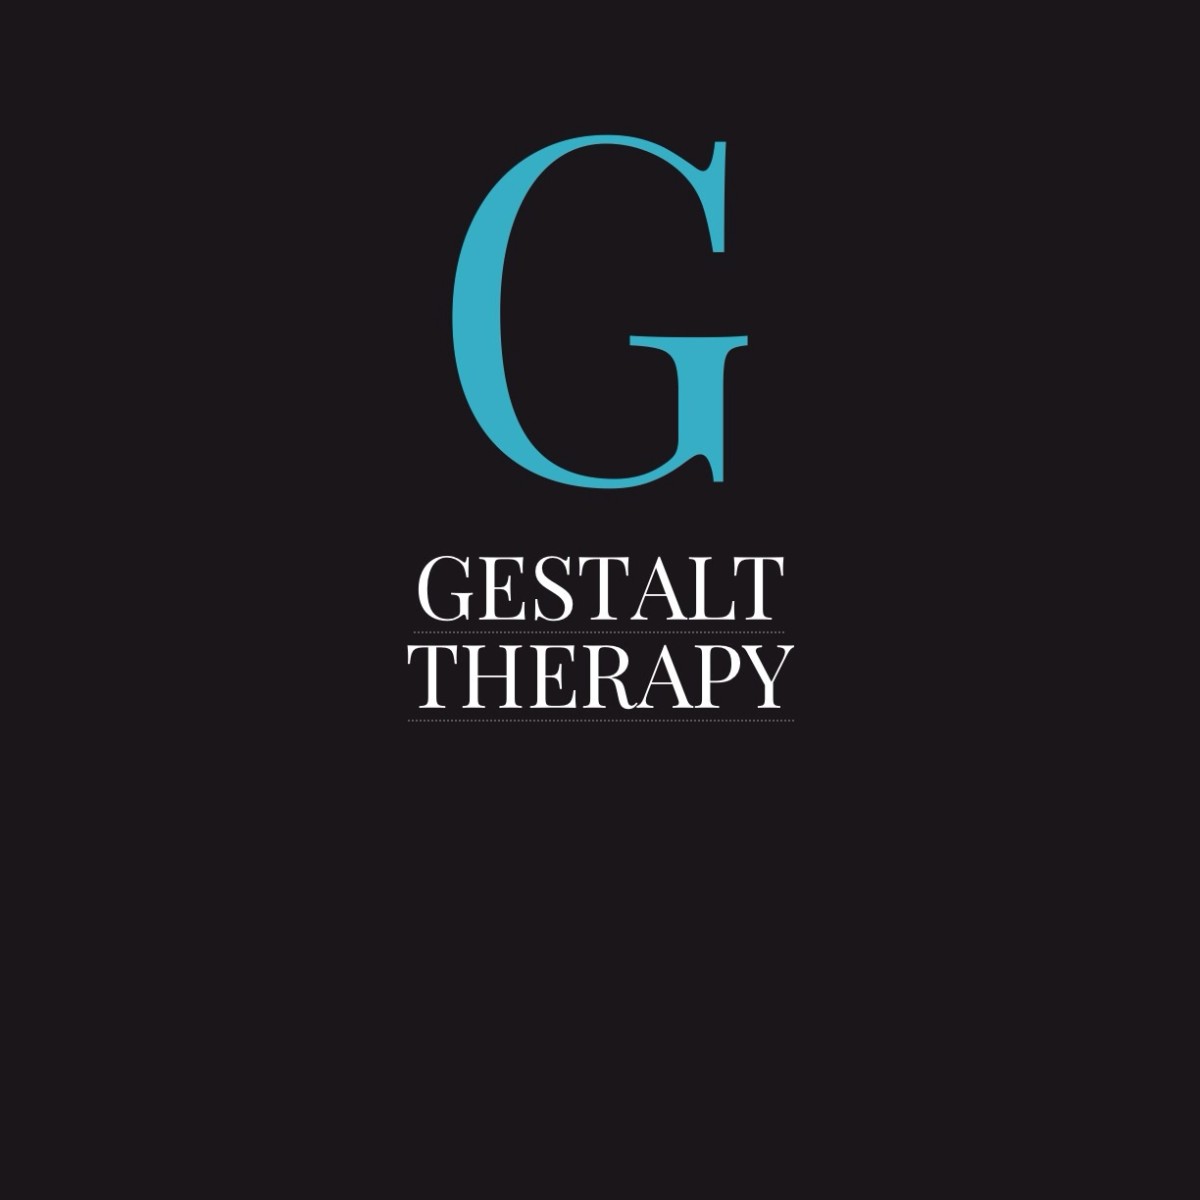 noun: gestalt therapy a psychotherapeutic approach developed by Fritz Perls (1893–1970). It focuses on insight into gestalts in patients and their relations to the world, and often uses role playing to aid the resolution of past conflicts.